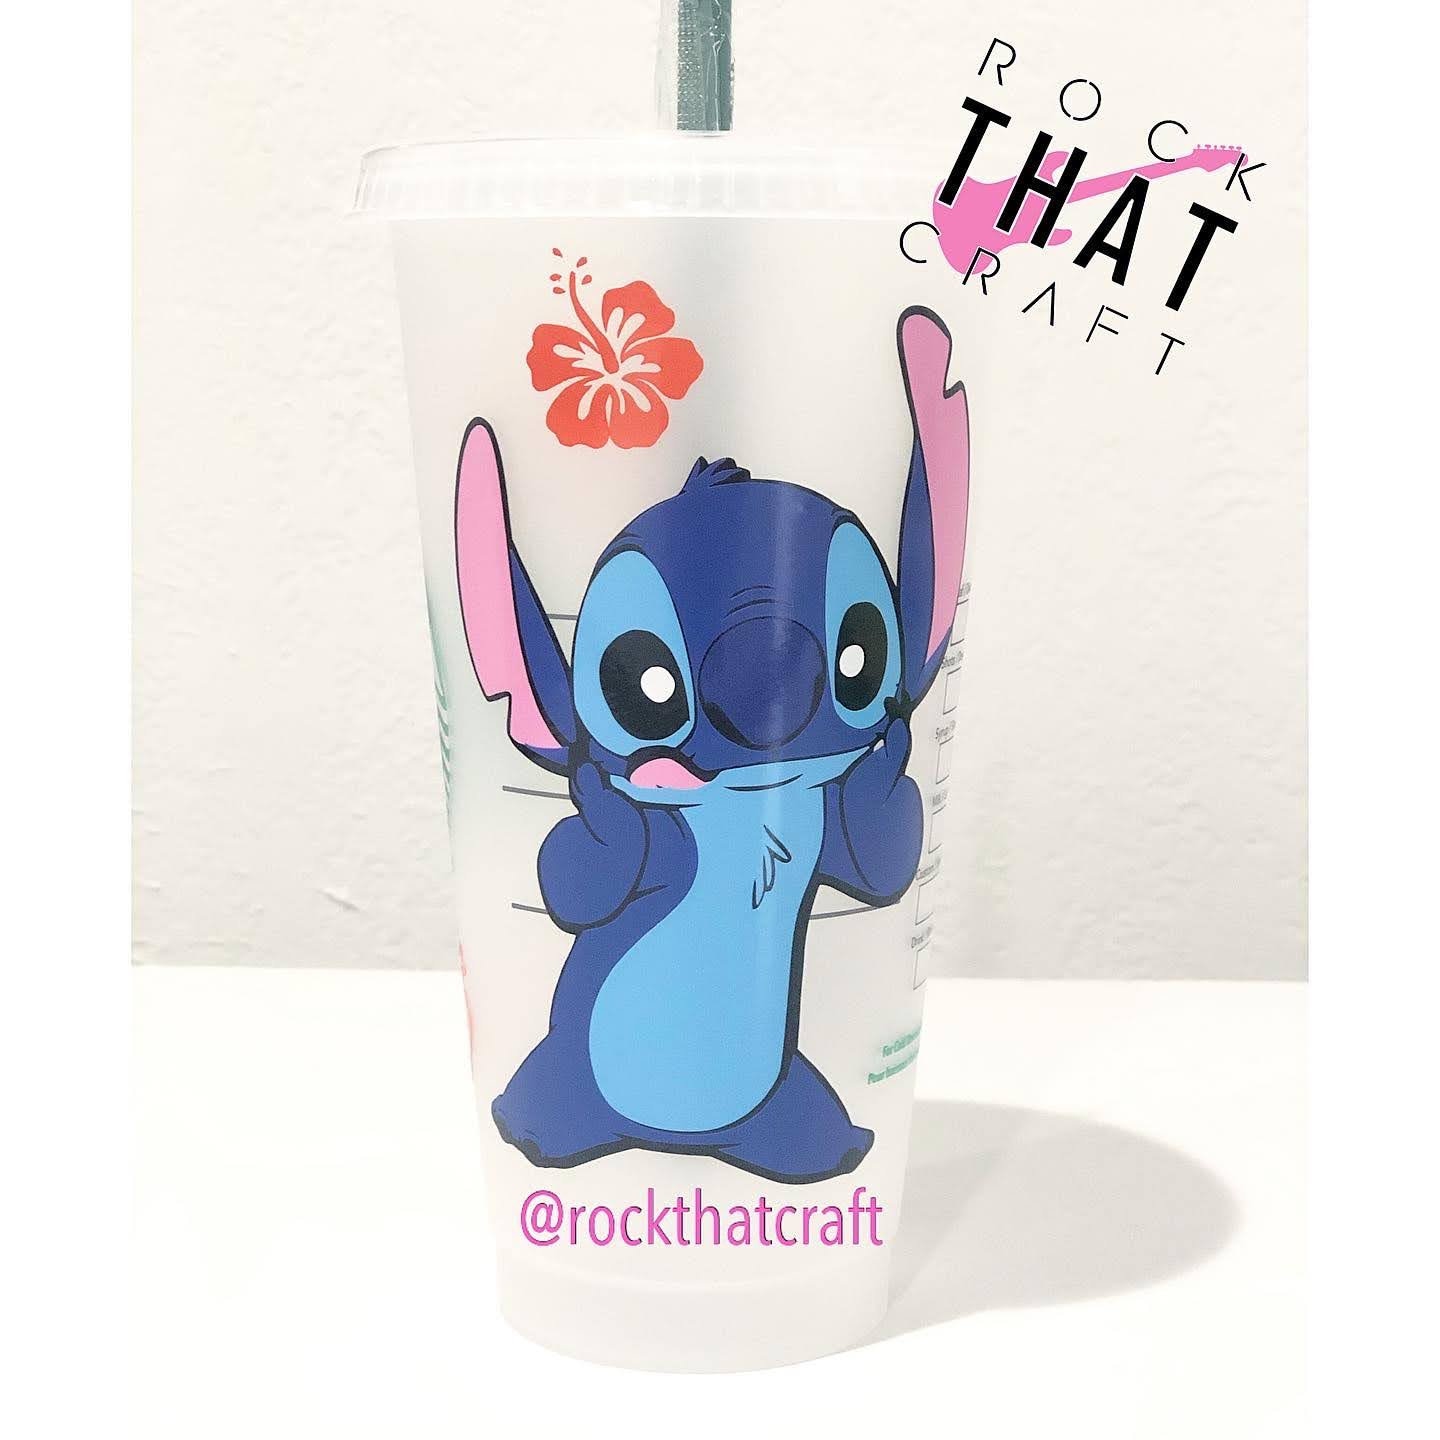 Lilo and Stitch Stay Weird 24oz Color Change Plastic Tumbler w Lid and Straw  